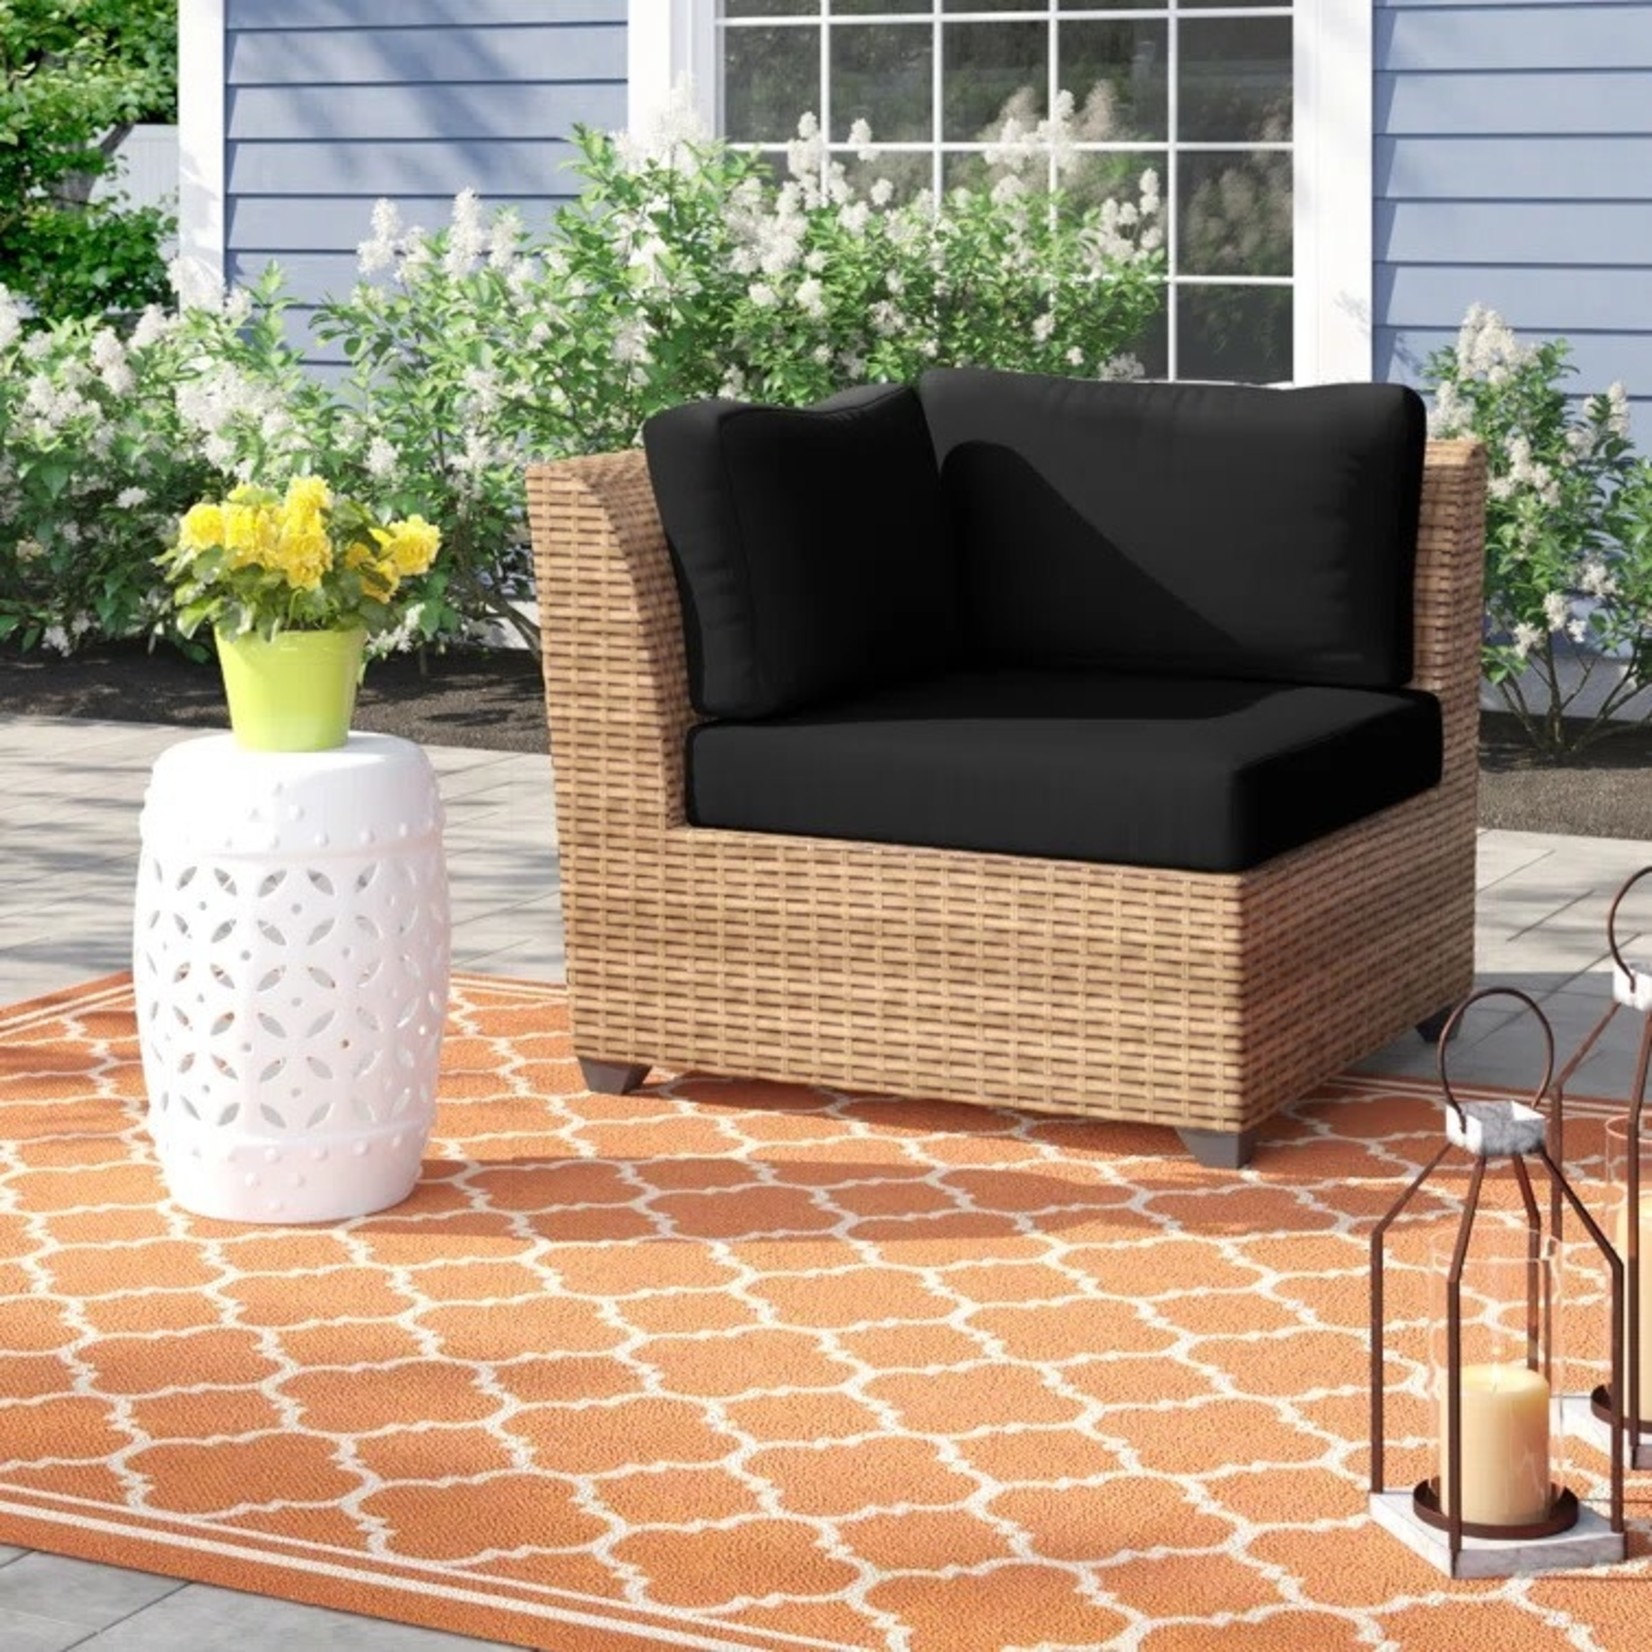 *COVERS ONLY Tegan Outdoor Cushion Covers - 3 Piece - Seat, Back & Side - Black - Final Sale